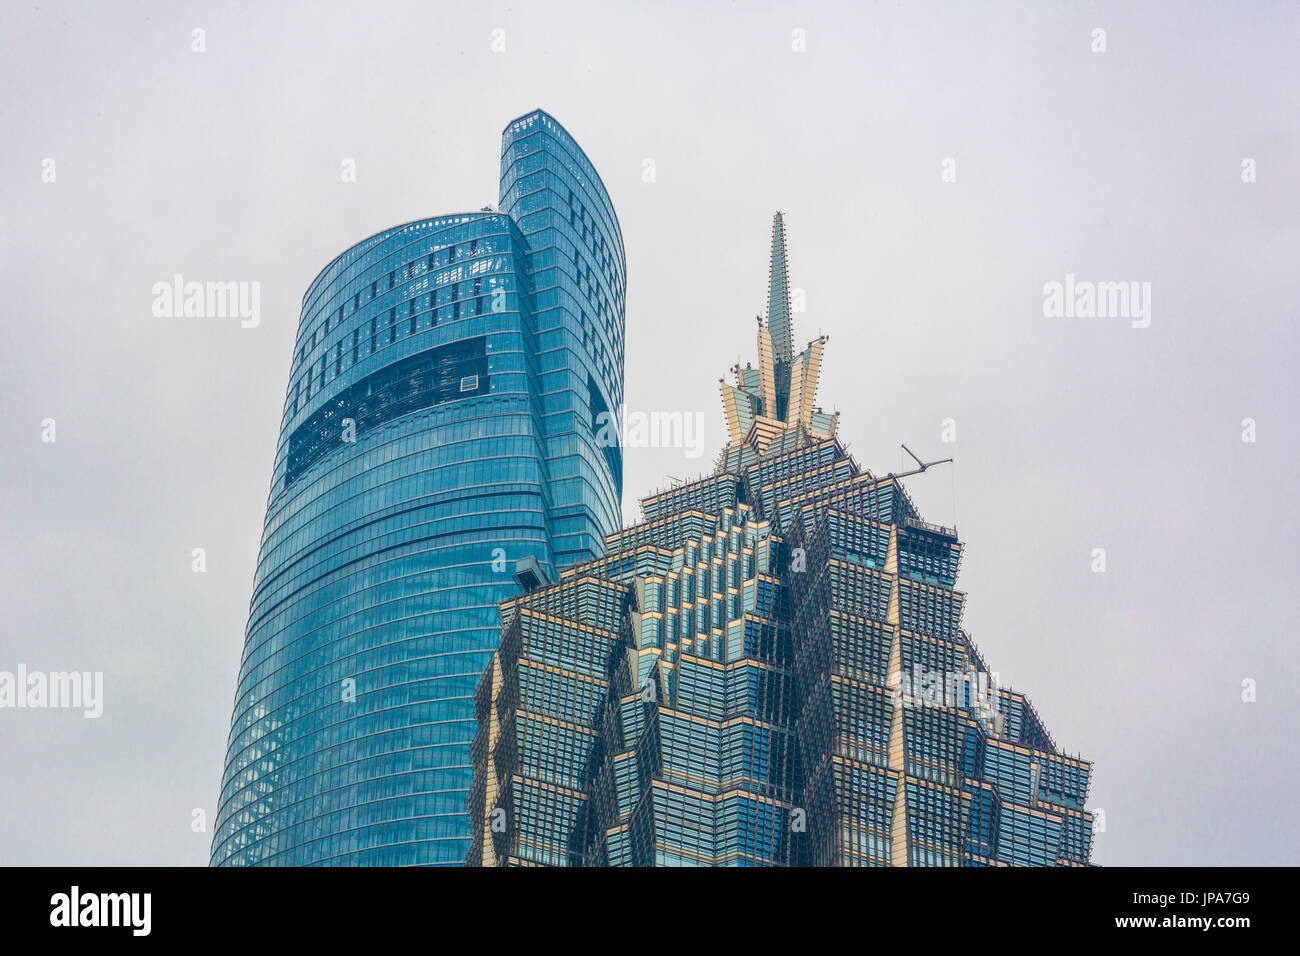 China, Shanghai City, Pudong District, World Financial Center and Jinmao Building Stock Photo